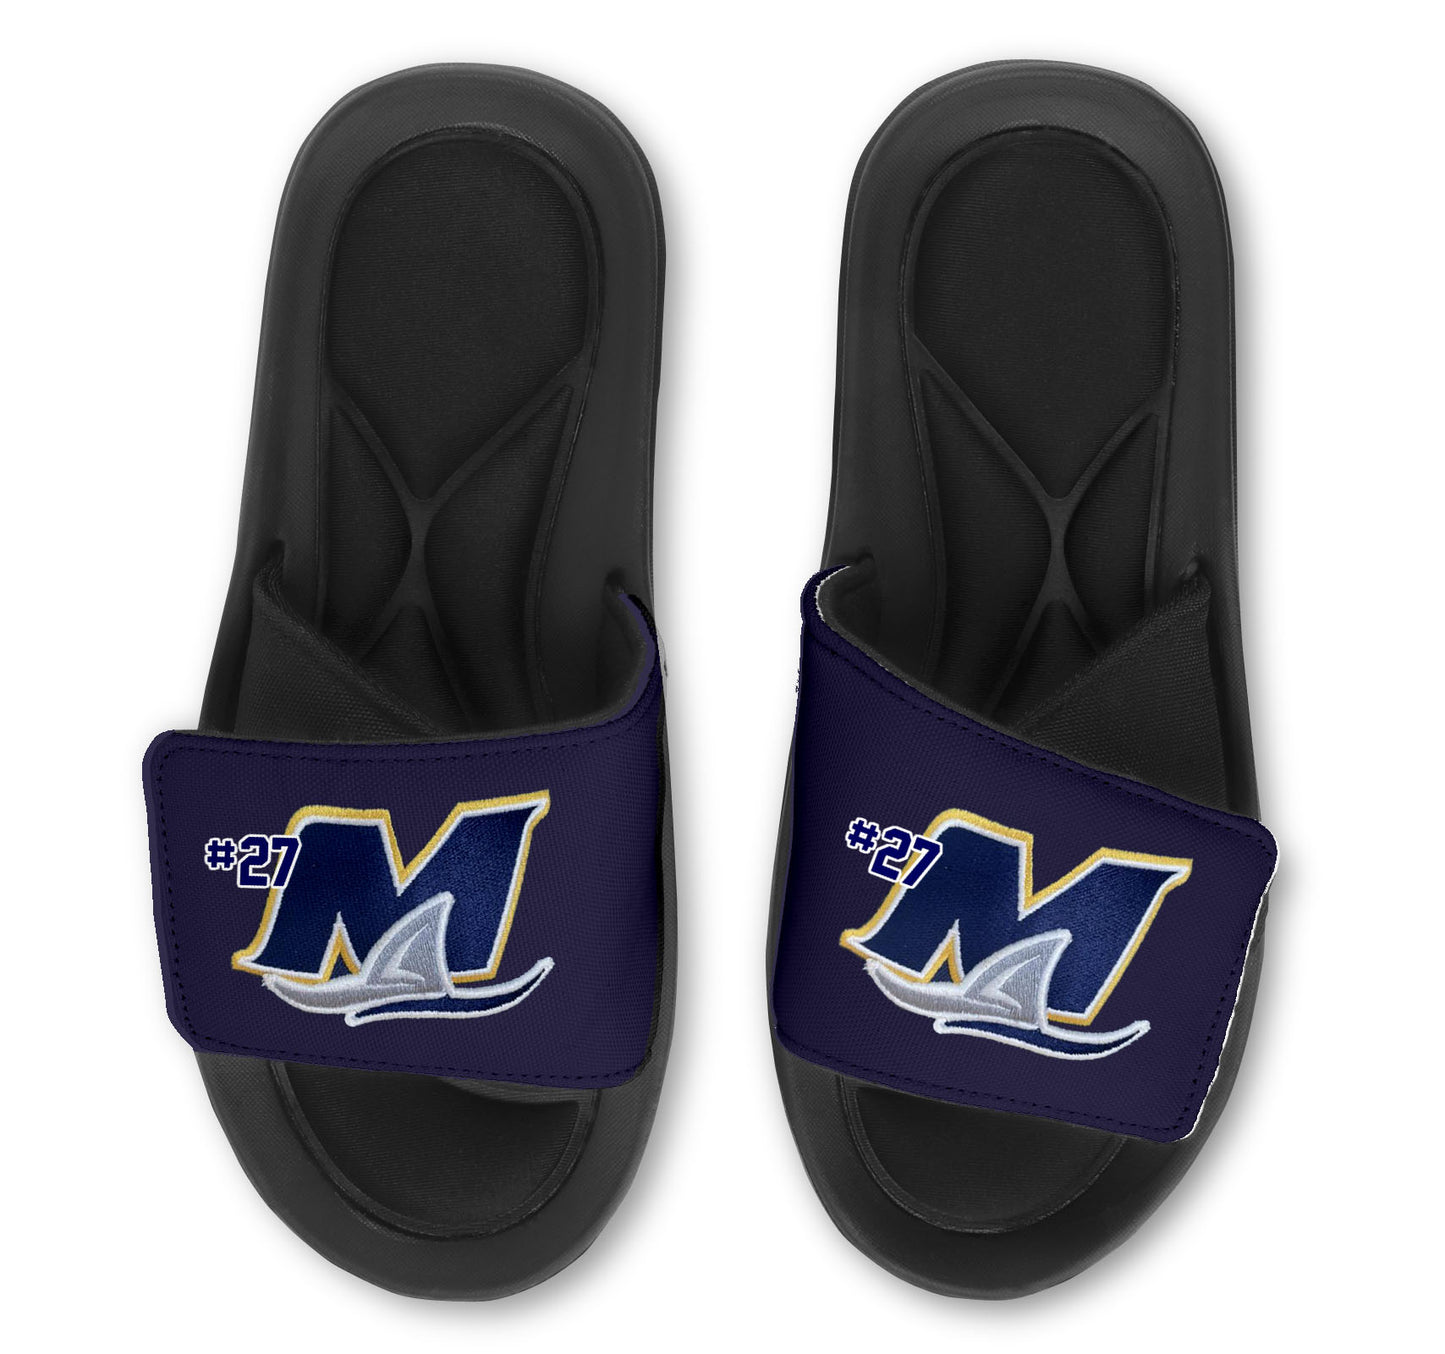 Custom Logo Slides Sandals Perfect for Every Sport